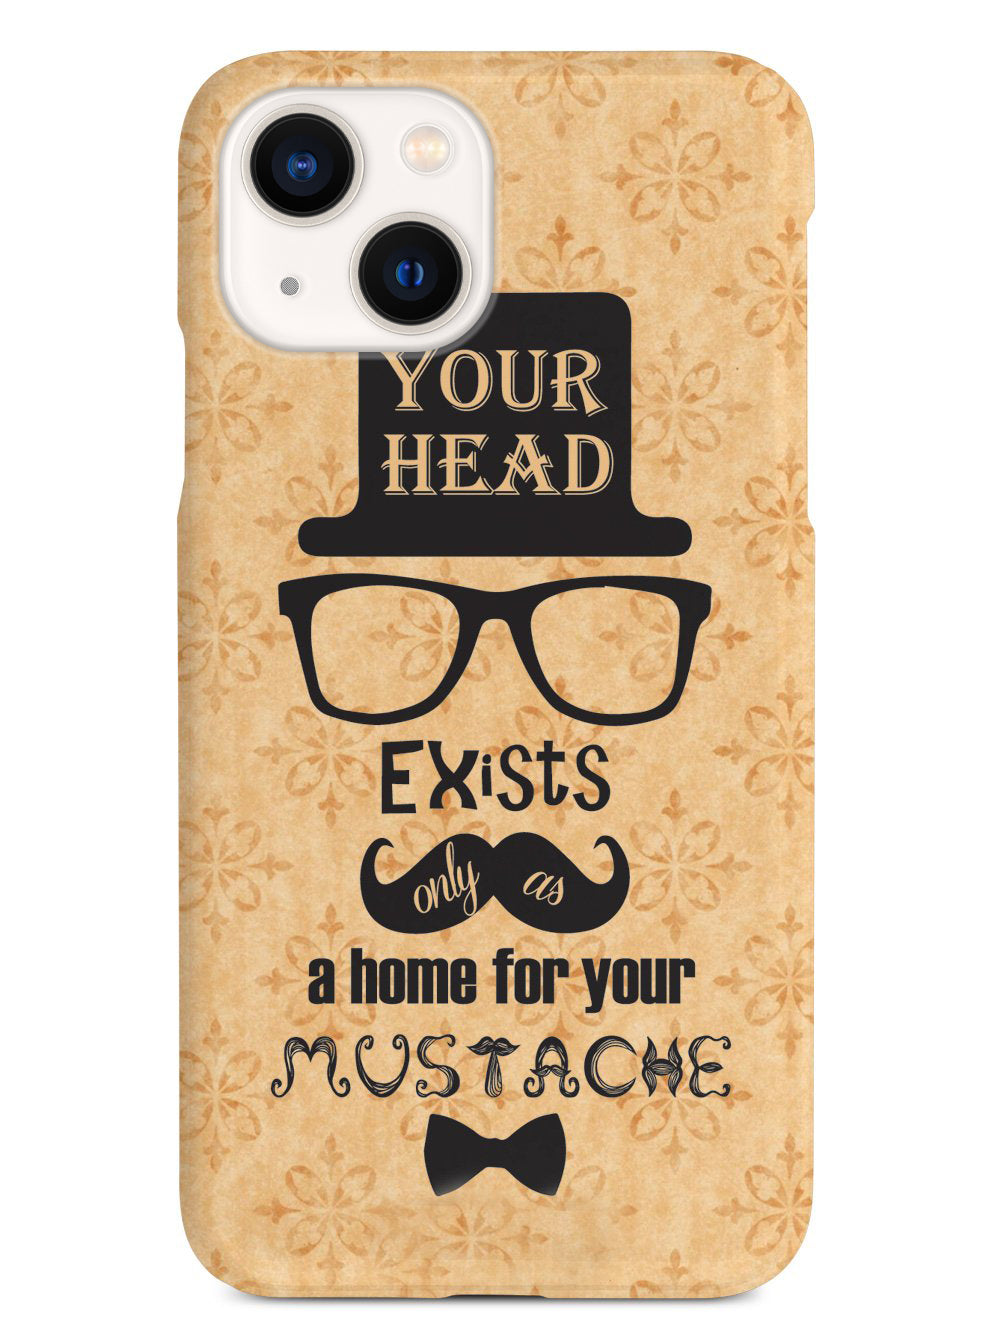 Home for Your Mustache Case